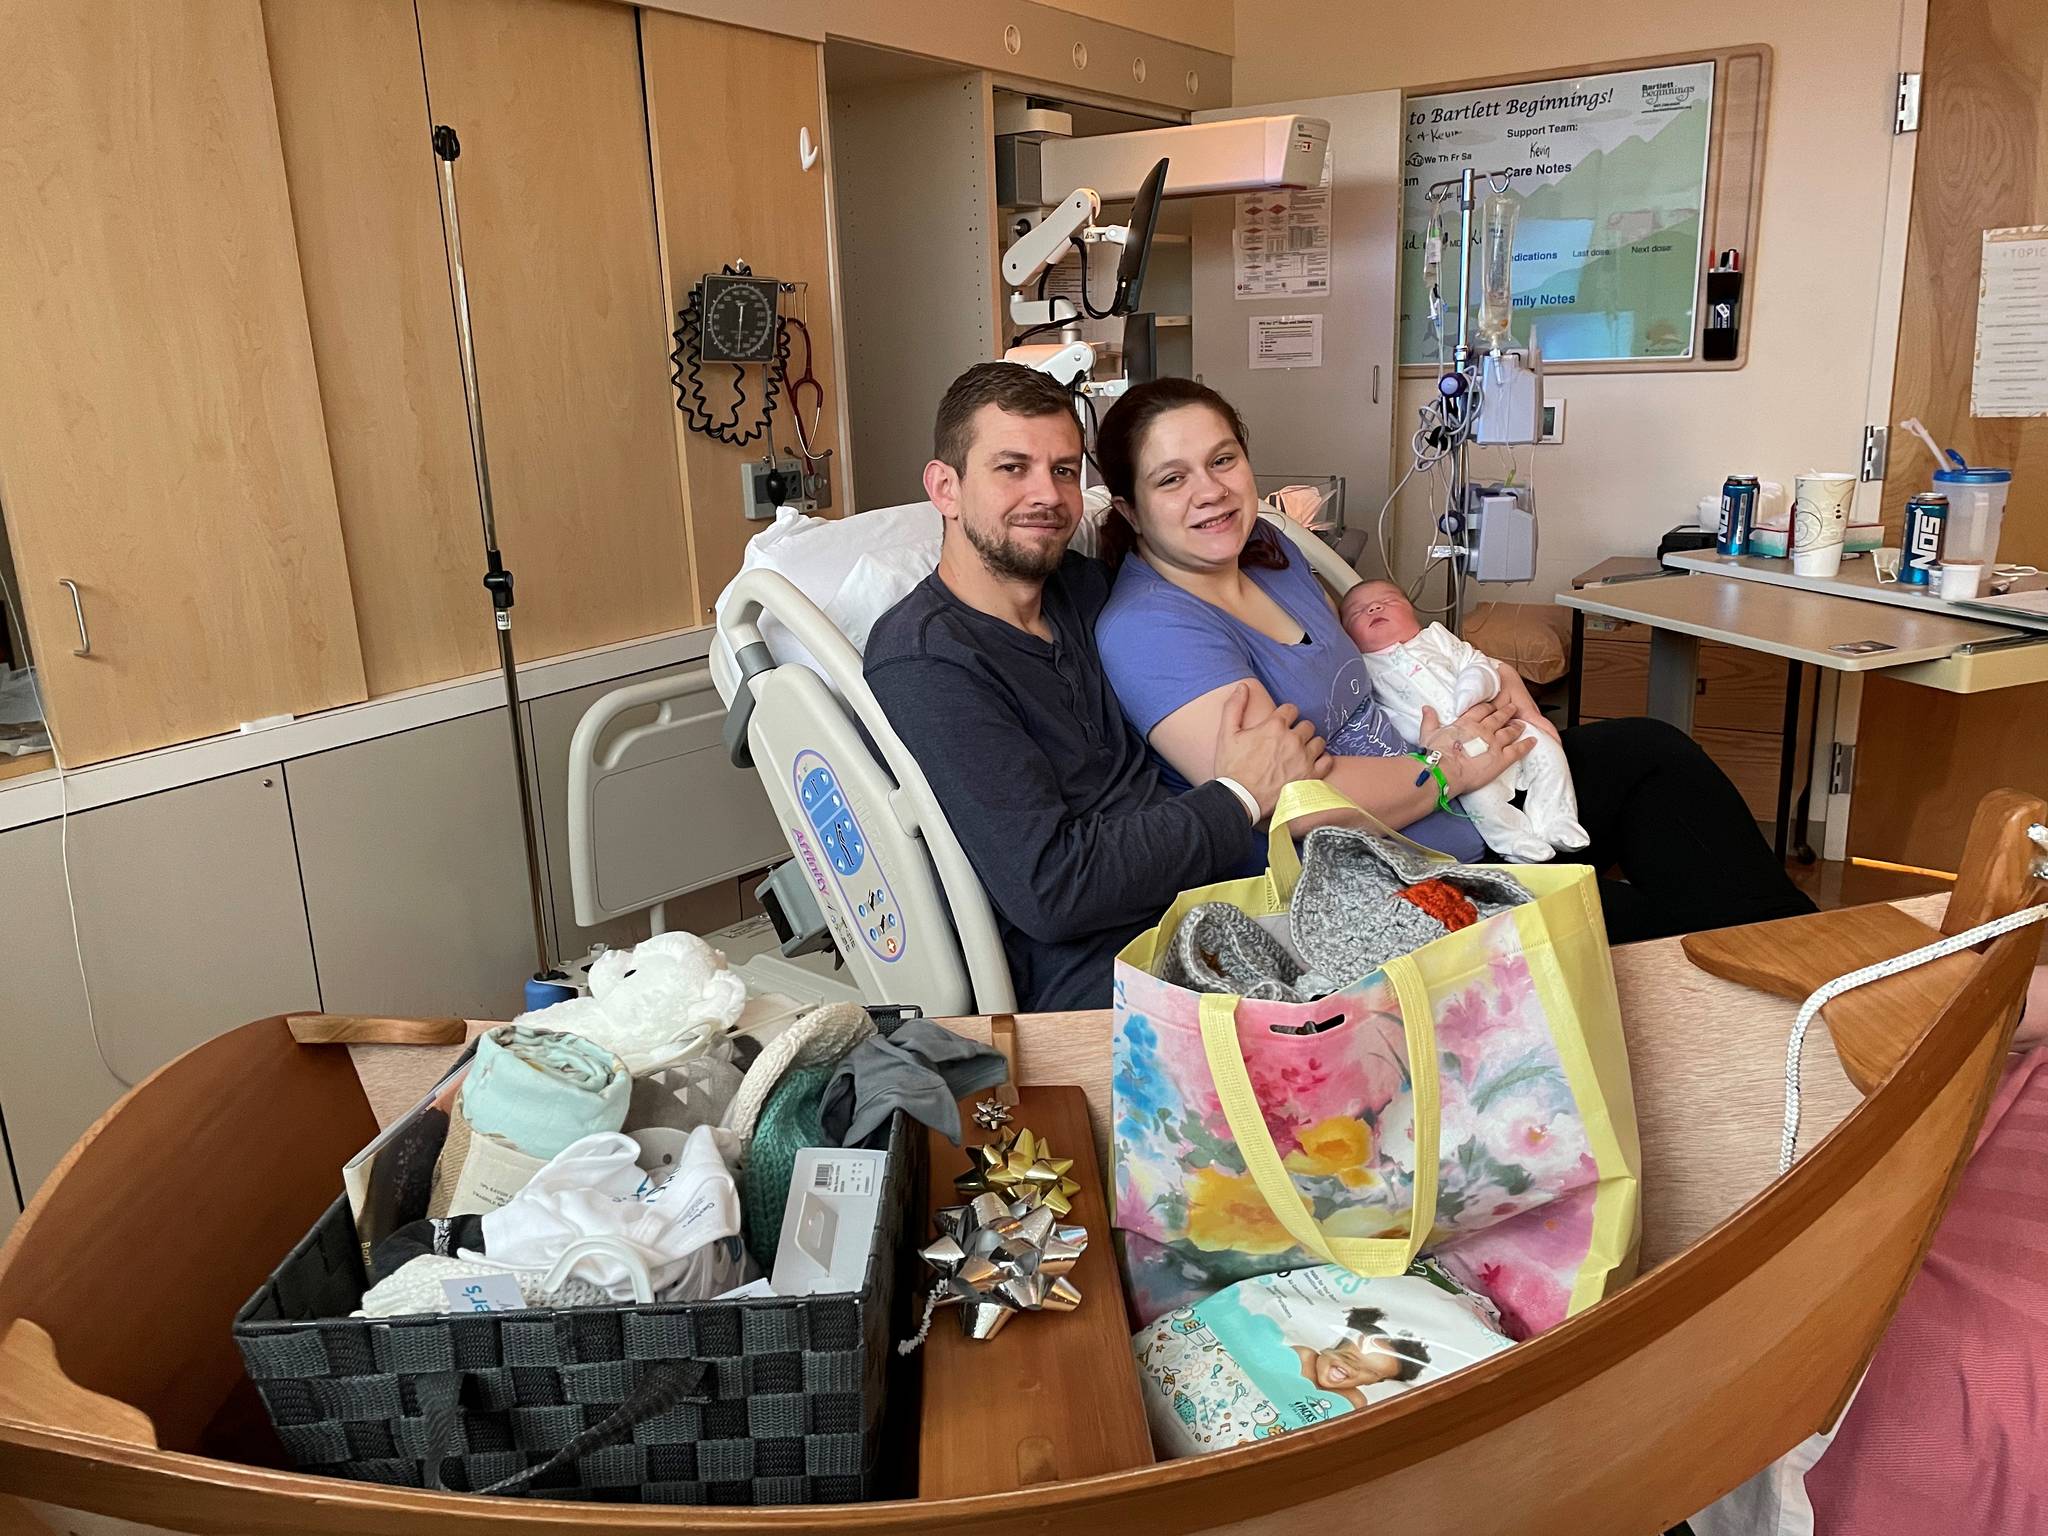 Kevin McCallister and Alexus Forehand smile with their recently born daughter, Madelynn Rose. The McCallisters of Skagway are the parents of the first baby born at Bartlett Regional Hospital in 2021. (Courtesy Photo / BRH)